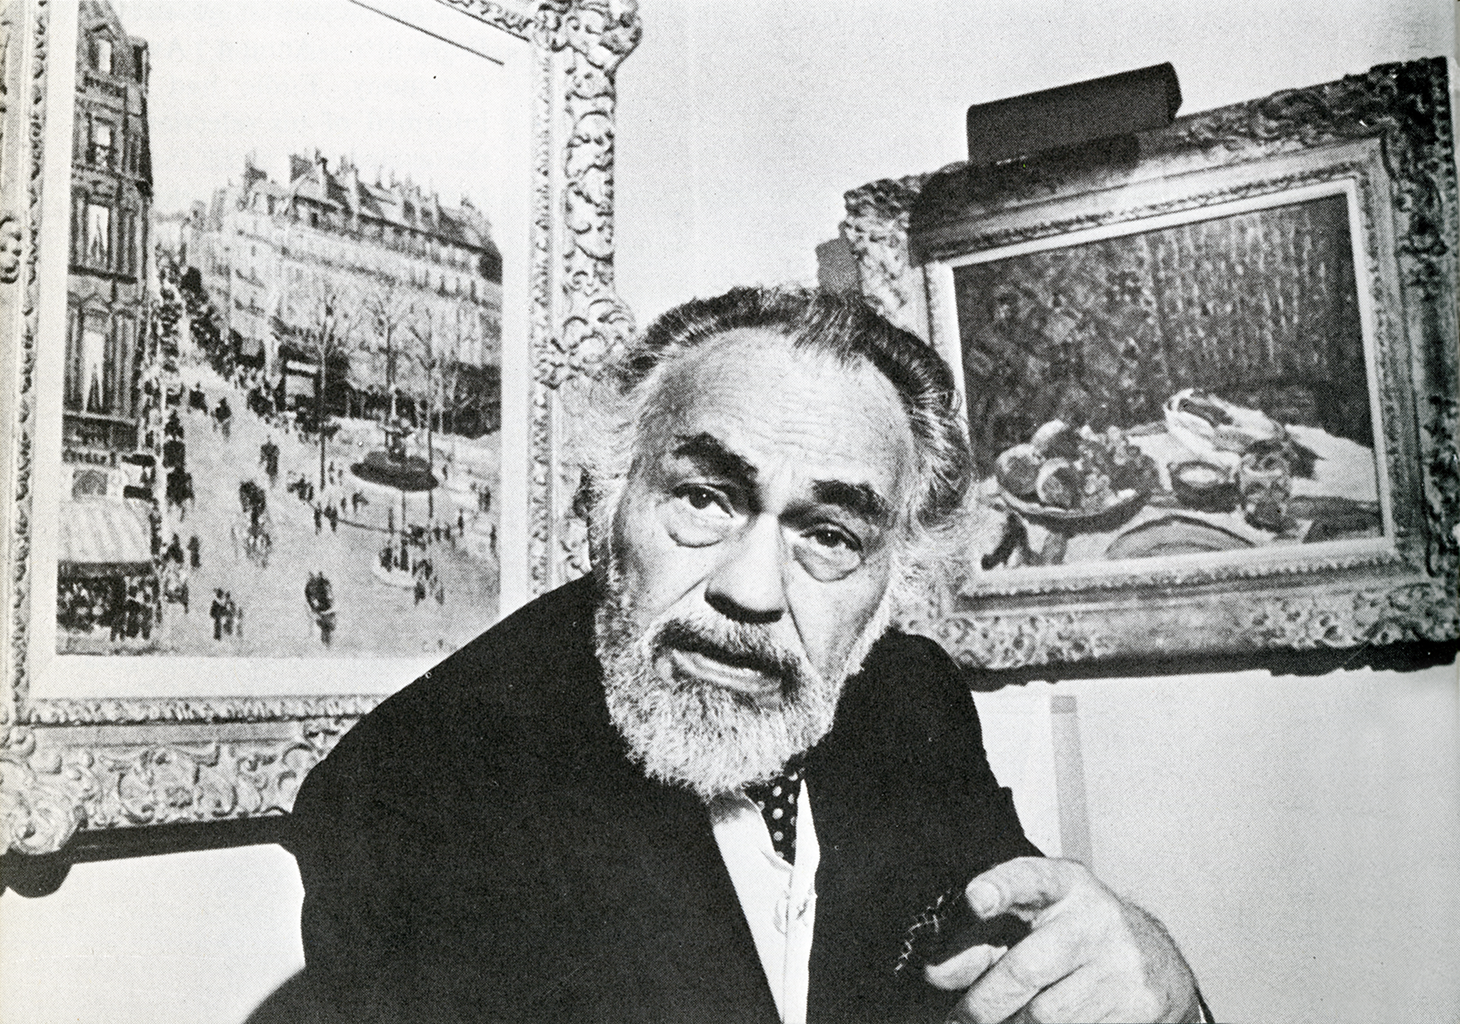 A black and white photograph of an older man with thick eyebrows and a gray beard. He wears a suit and points toward the camera. There are two impressionist-style paintings framed and hanging on the wall behind him.